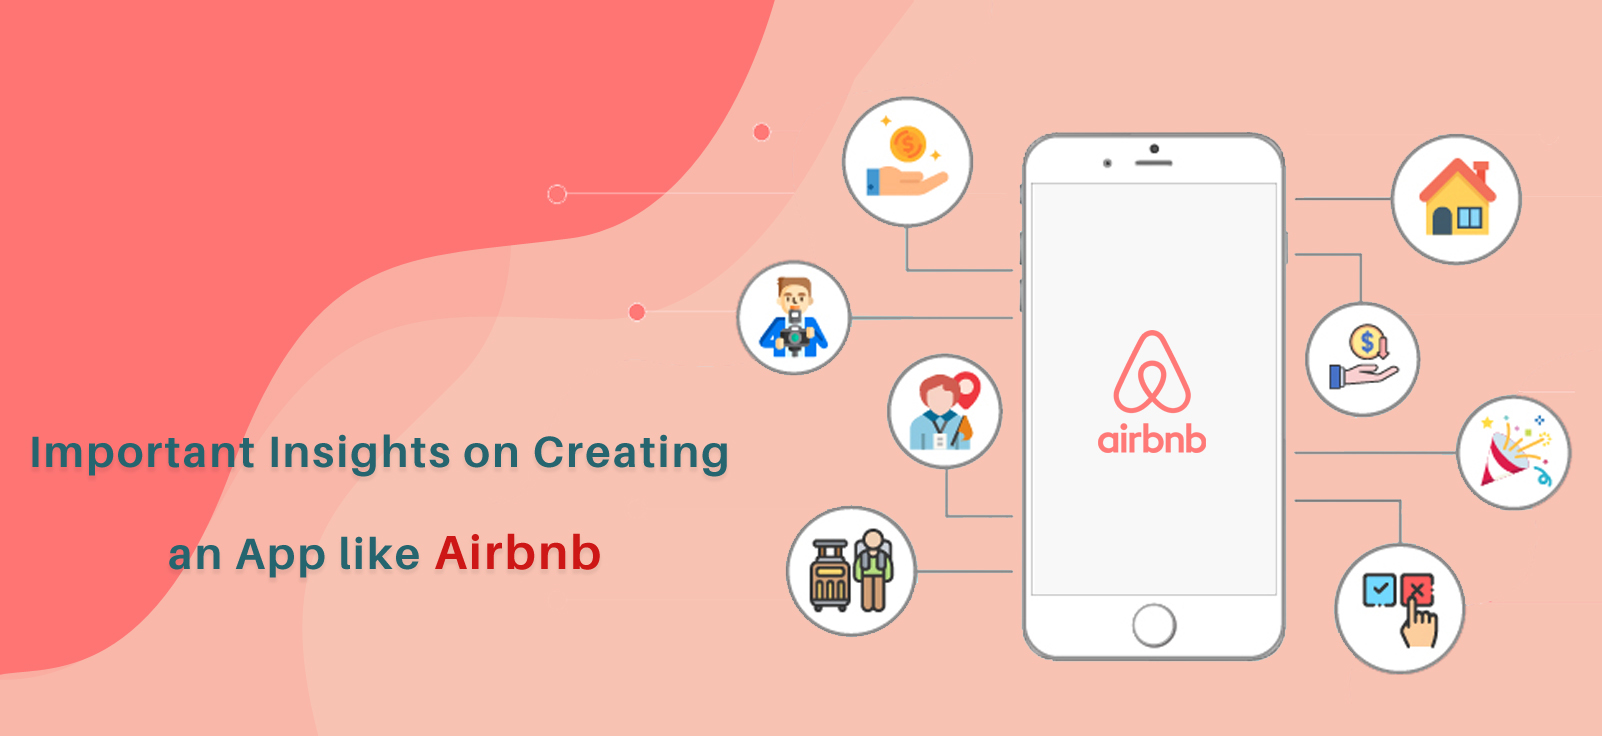 airbnb similar apps